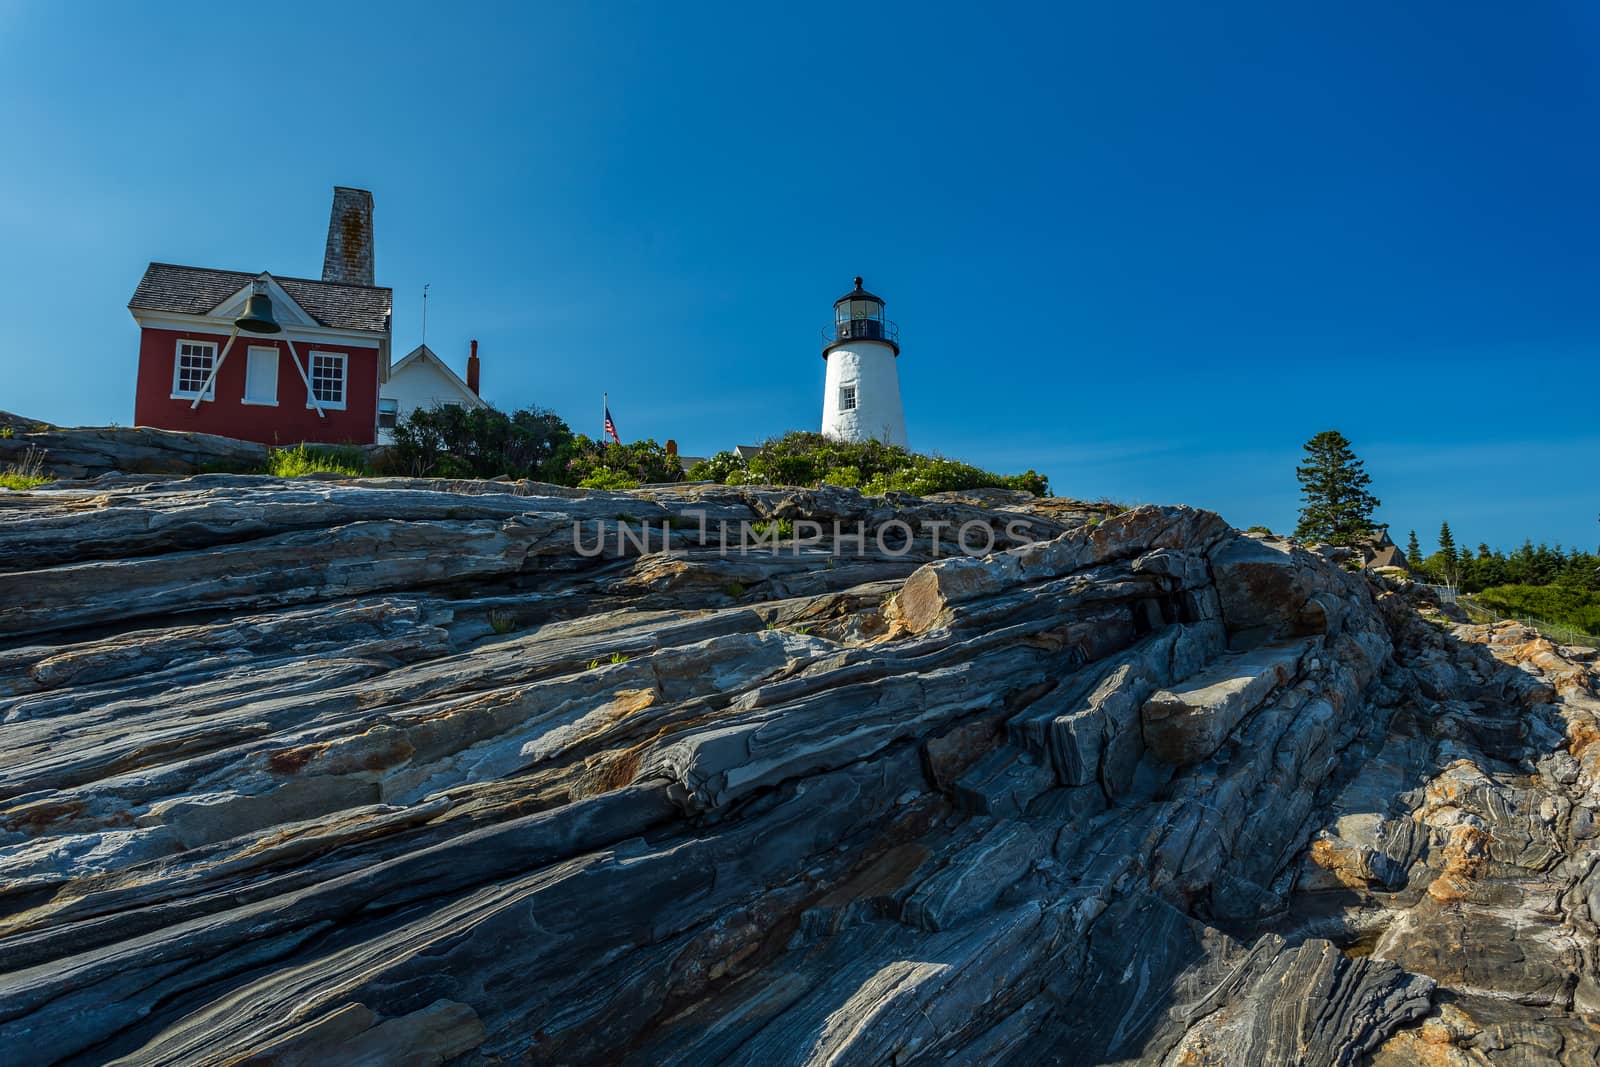 The Pemaquid Point Light is a historic U.S. lighthouse located in Bristol, Lincoln County, Maine, at the tip of the Pemaquid Neck. The lighthouse was commissioned in 1827 by President John Quincy Adams and built that year.